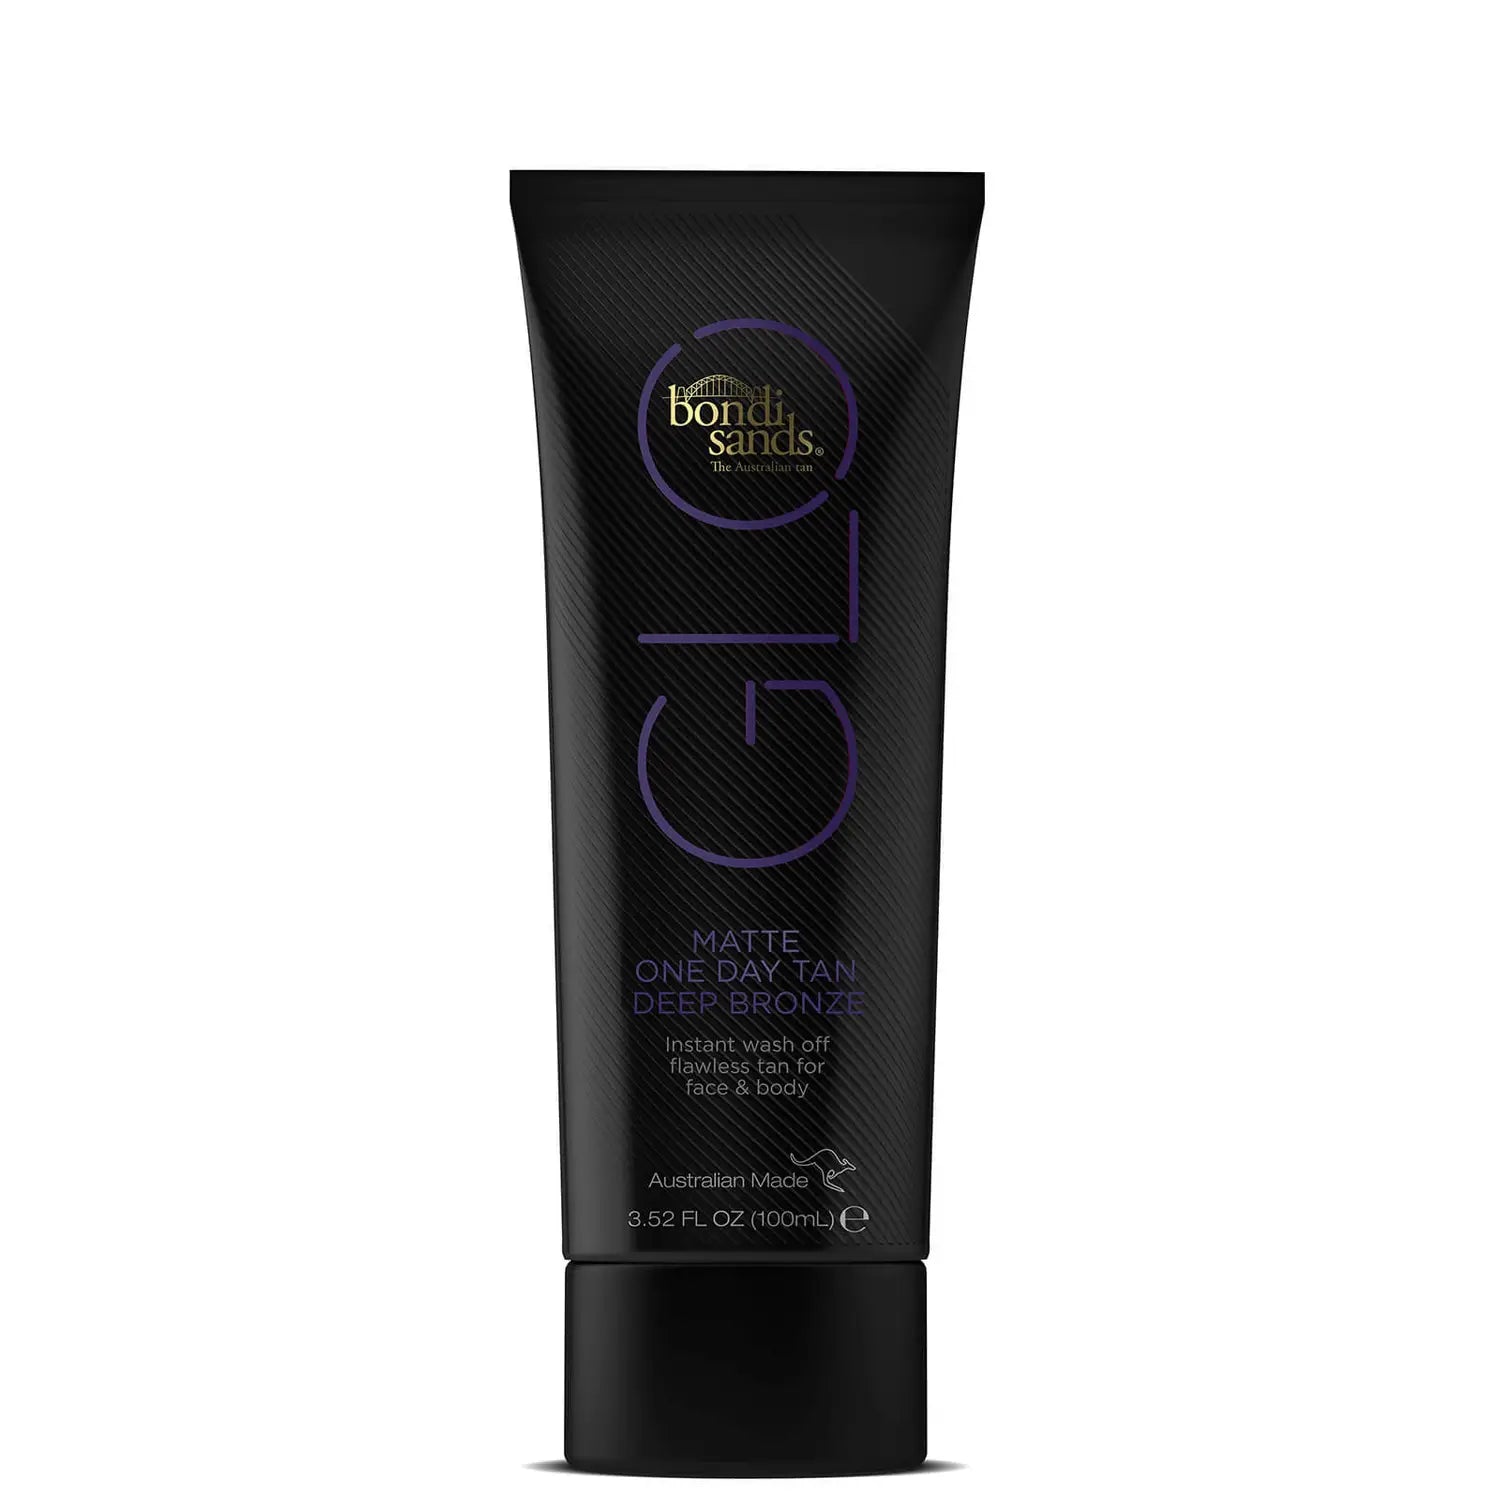 A tube of black and purple hair cream on a white background.